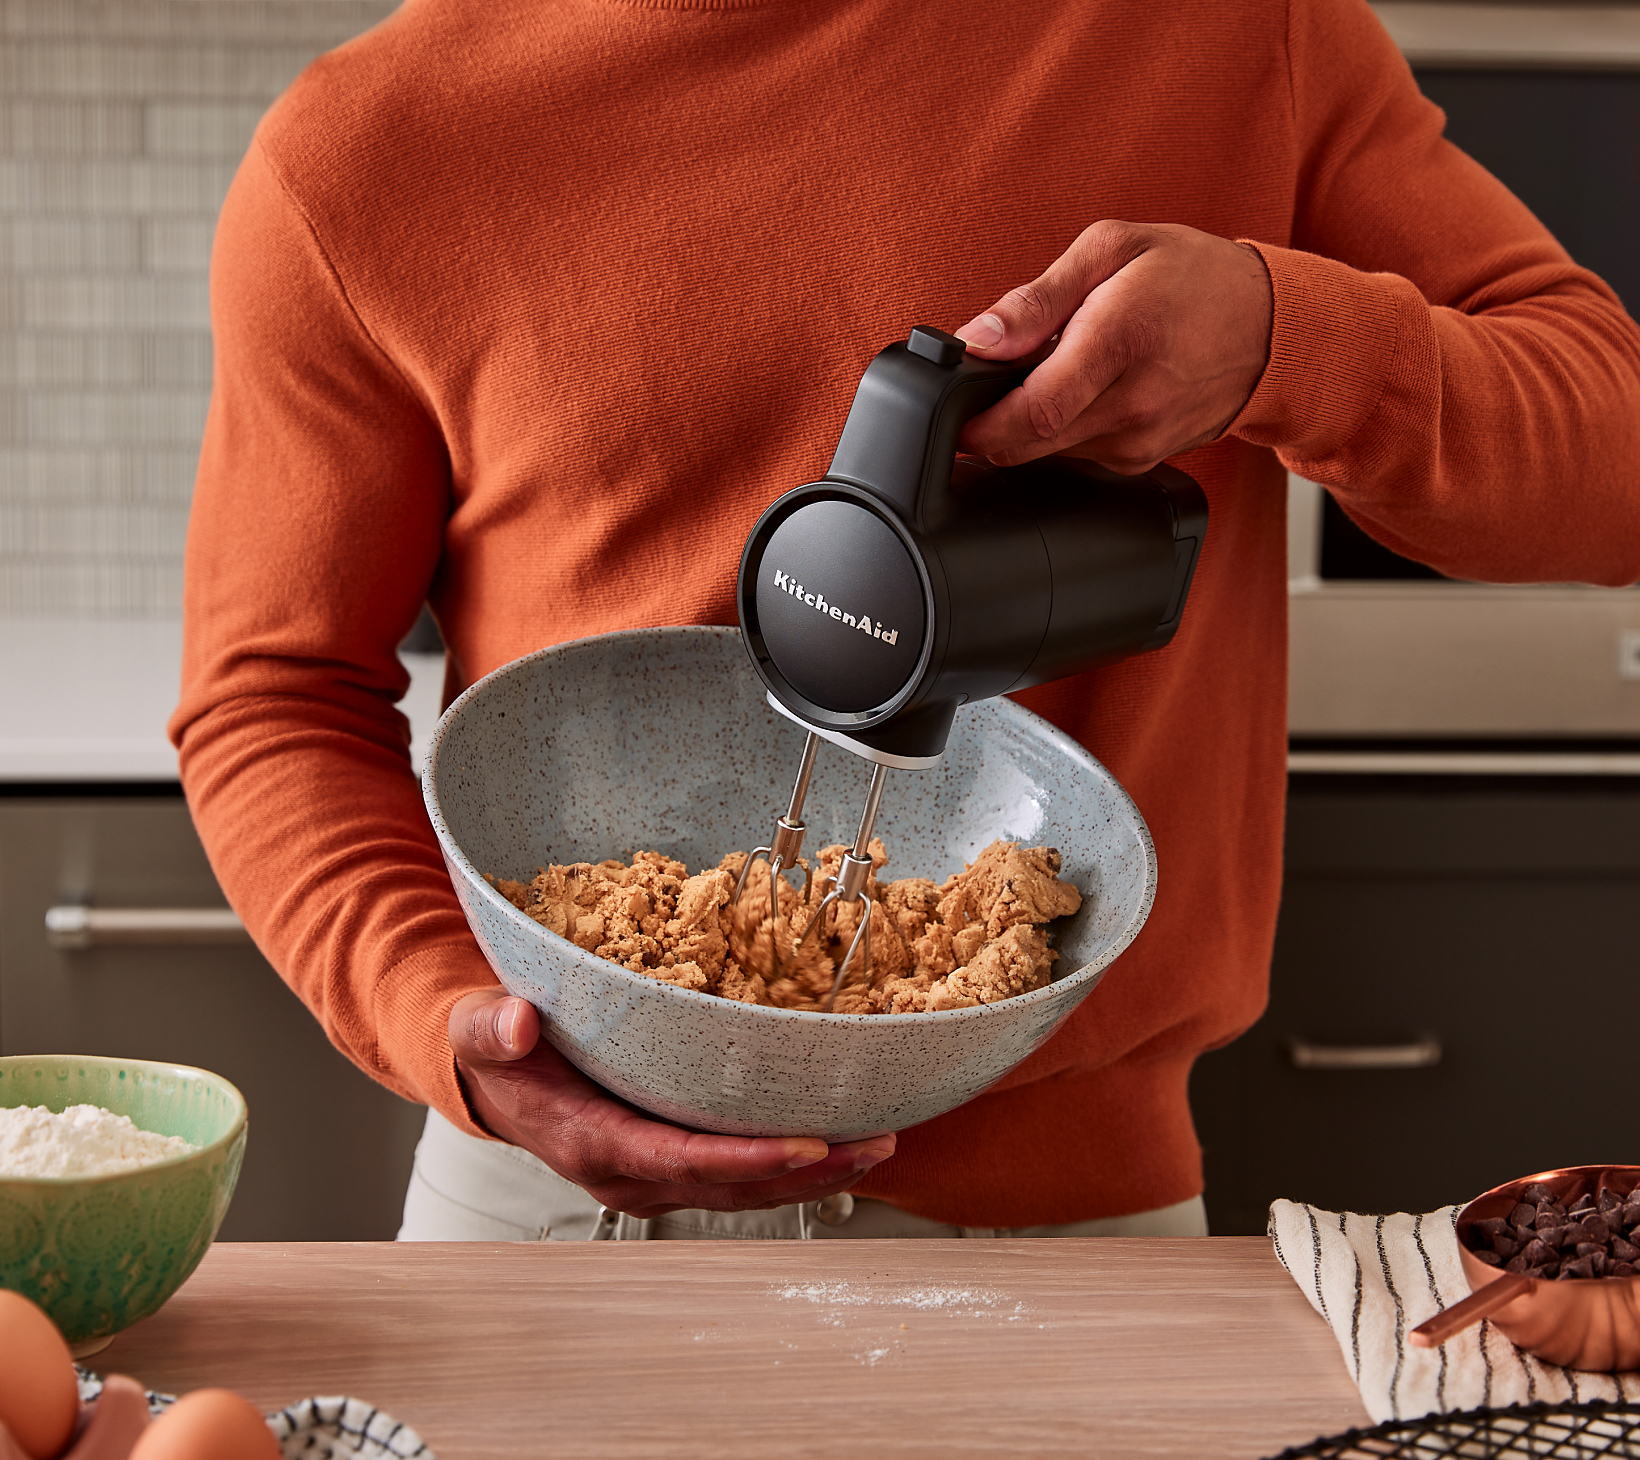 How Cordless Appliances Are Changing the Future of Cooking